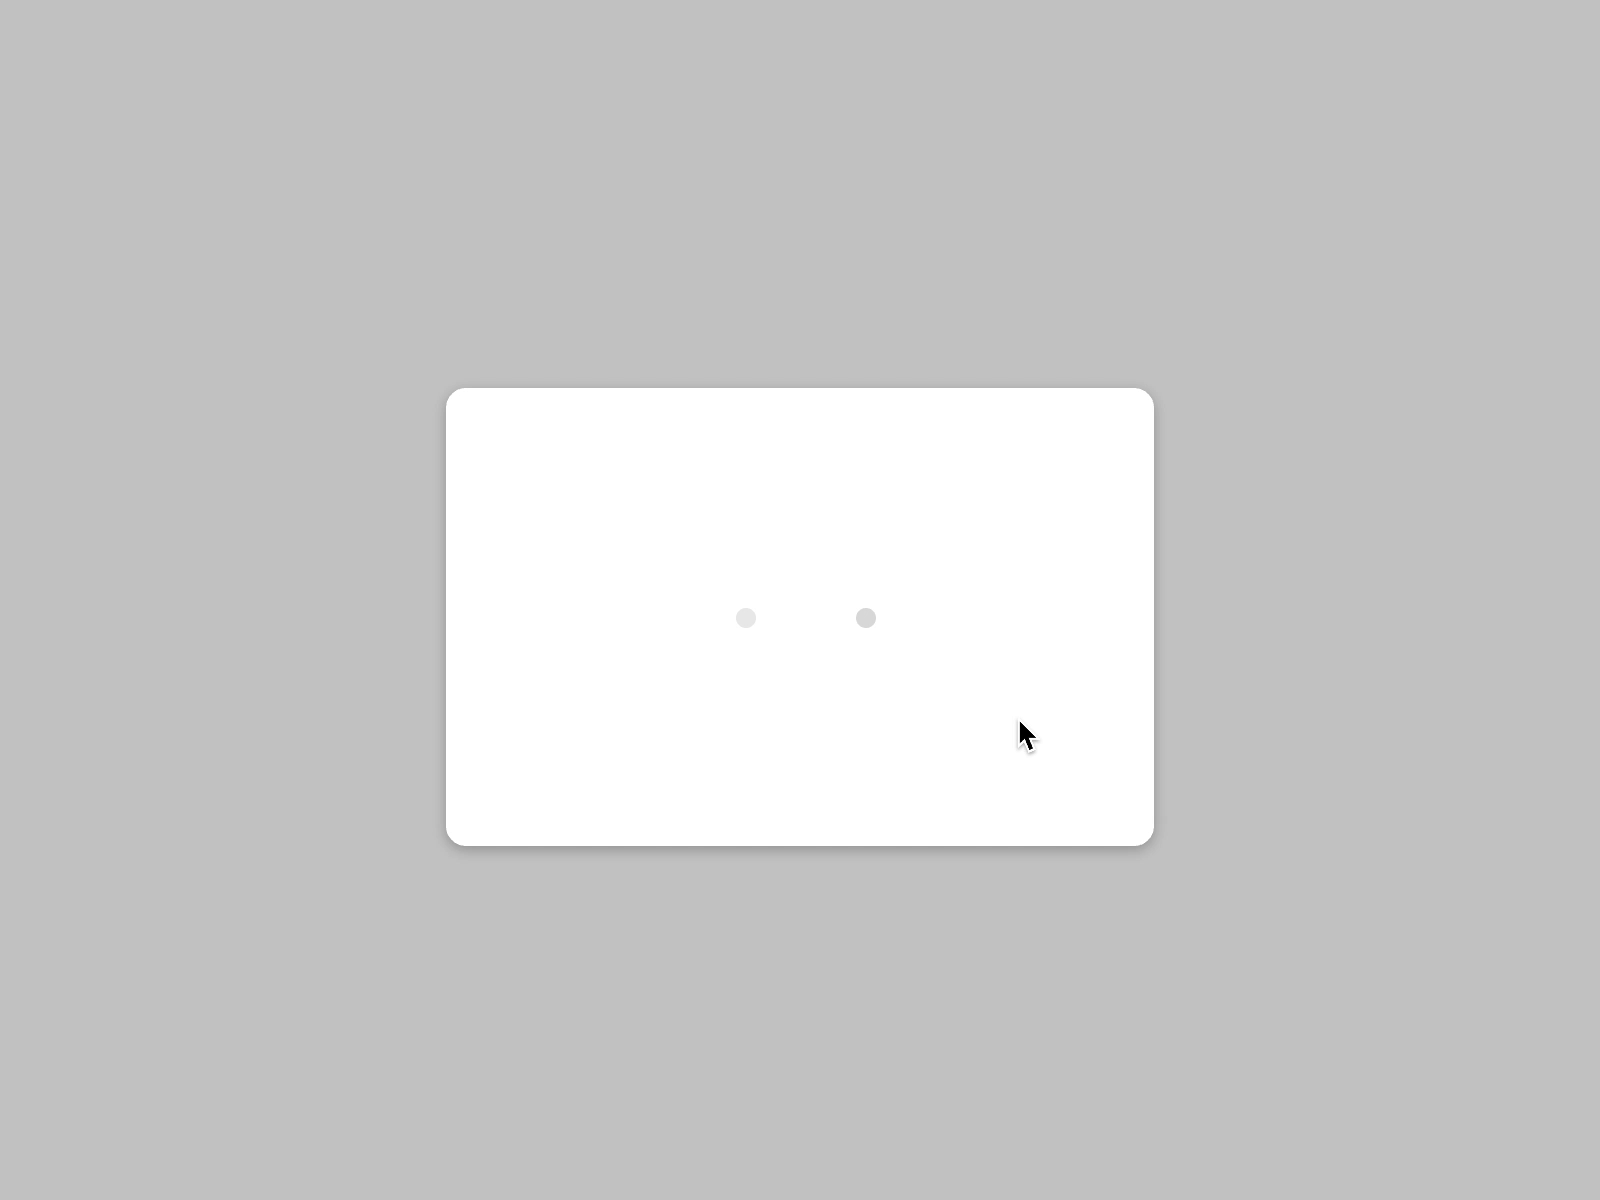 Daily UI practice - 076 Loading